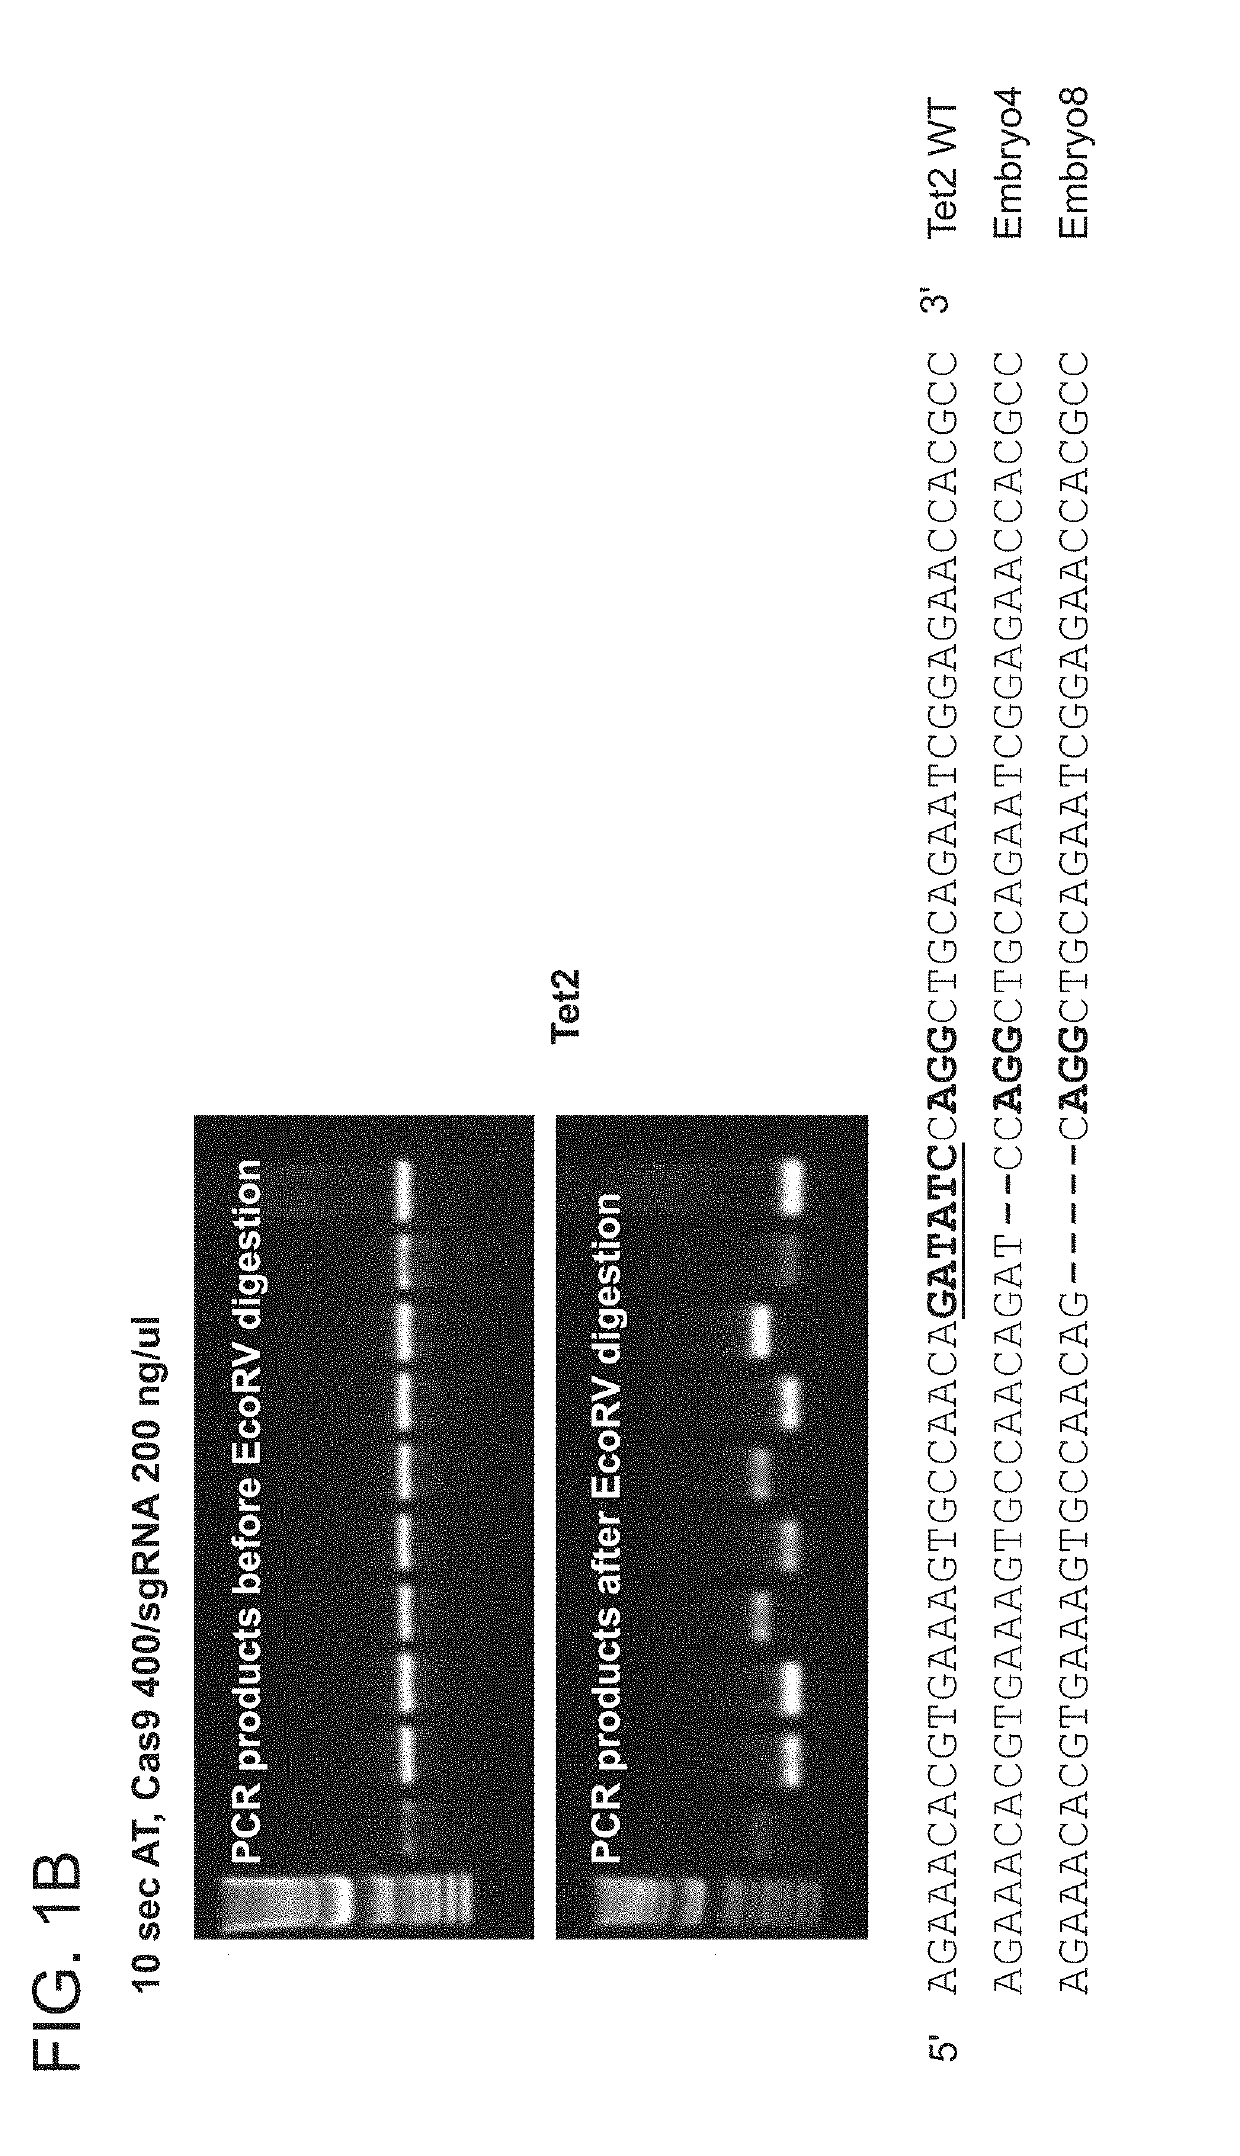 High efficiency, high throughput generation of genetically modified non-human mammals by multi-cycle electroporation of cas9 protein